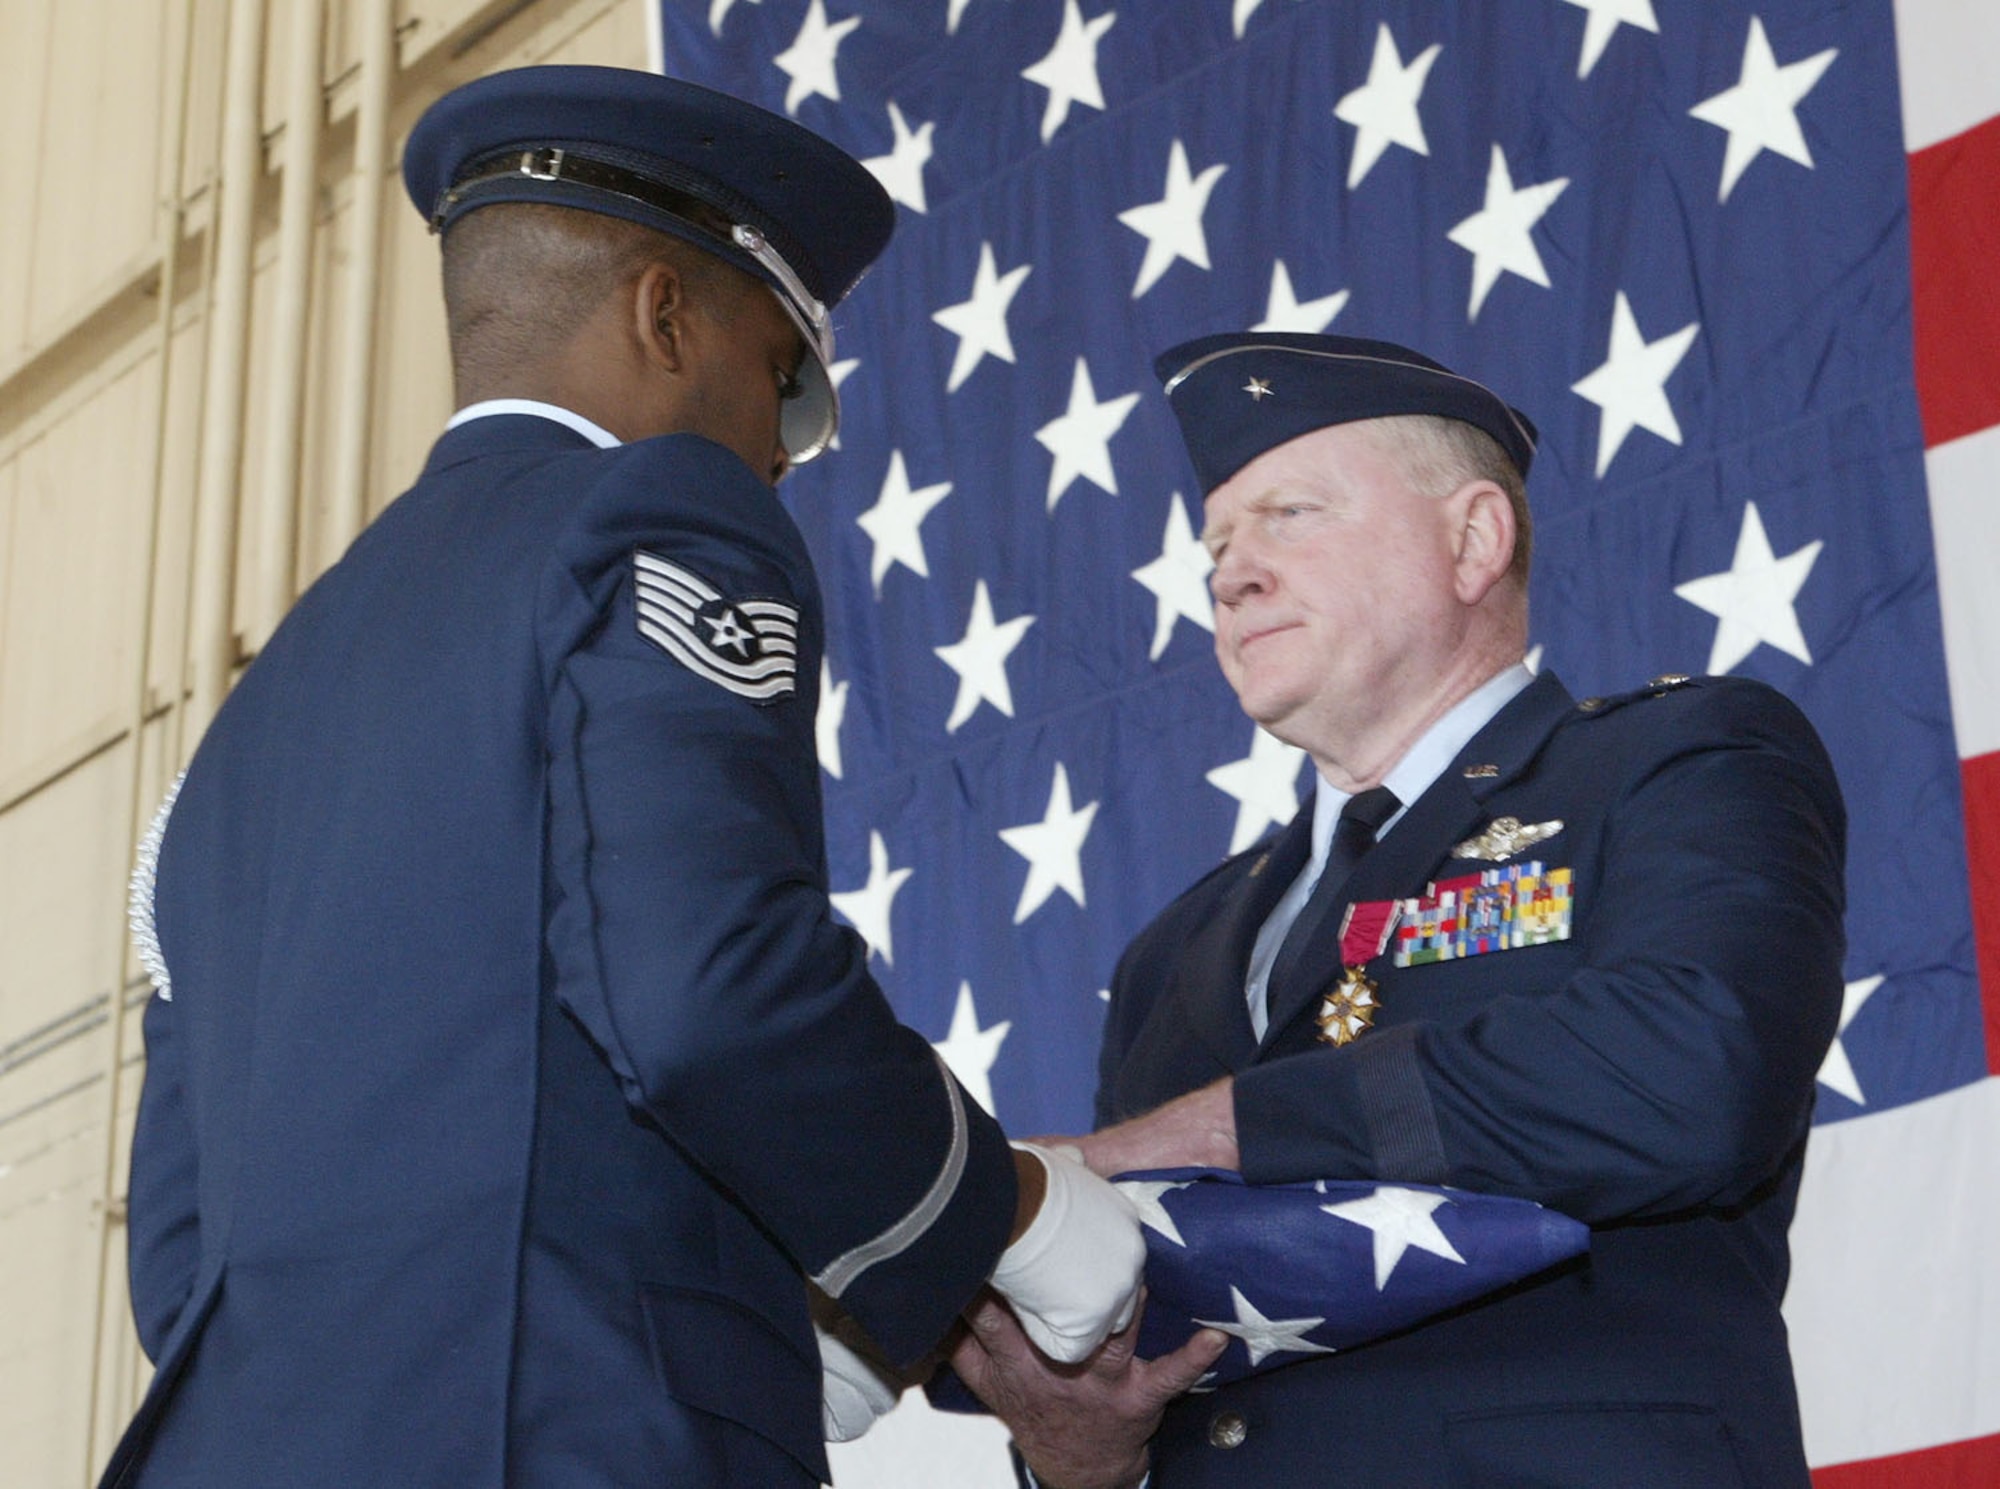 DOBBINS AIR RESERVE BASE, Ga. -- Tech. Sgt. Darrell Harper, 94th Airlift Wing Honor Guard, presents colors to Brig. Gen. Thomas Stogsdill, who surrendered command of the 94AW and retired from the Air Force Reserve. The general has served since 1969. (U.S. Air Force photo by Don Peek)